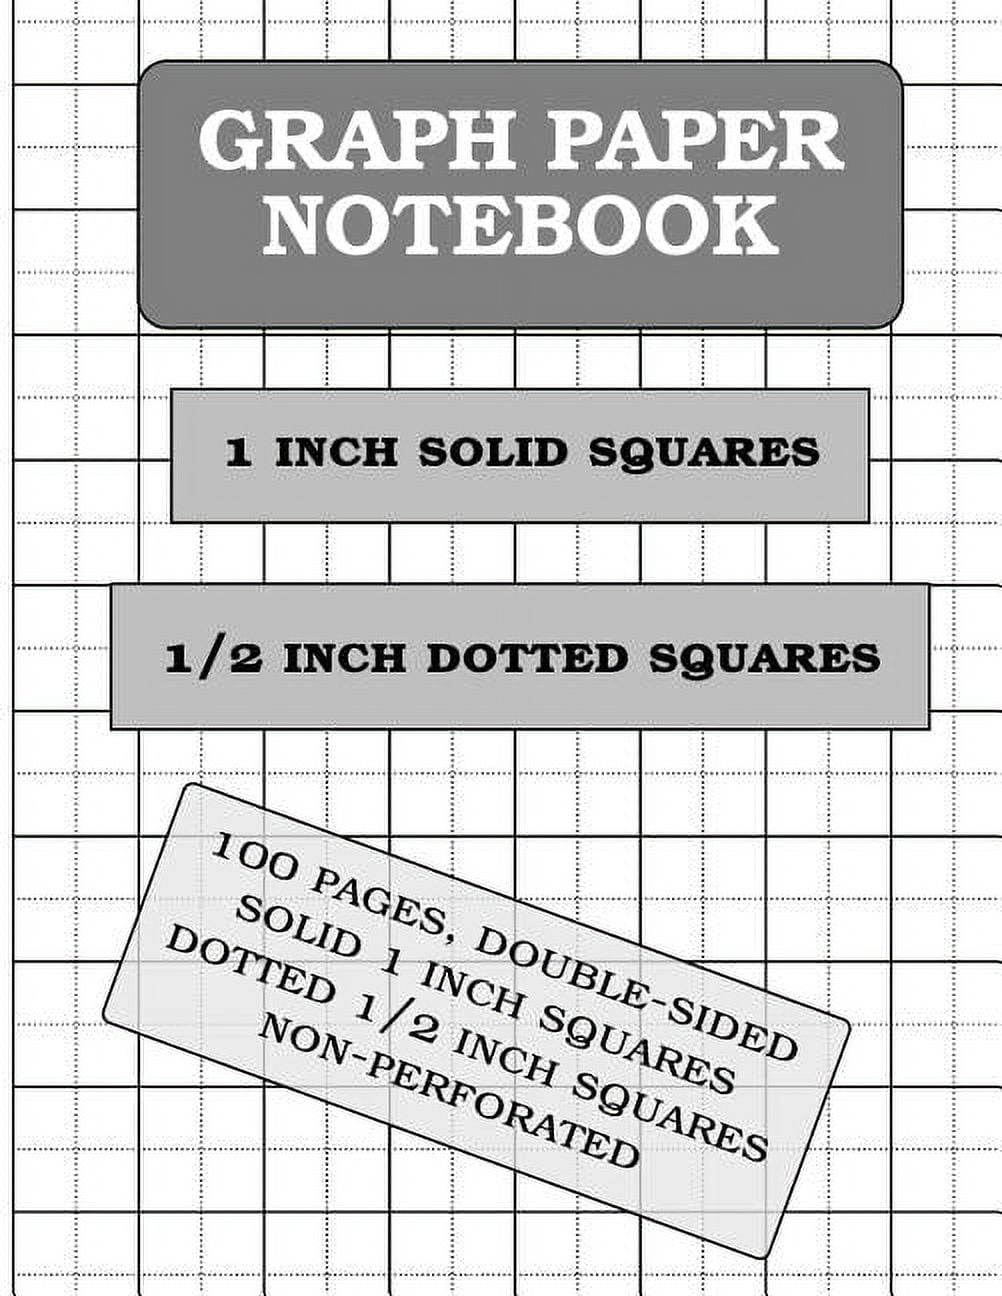 1 CM Square Graph Paper Notebook: One Centimeter Graph Paper, 20x26 Square  Grid, 520 Squares Per Page, Double-Sided Printing & Non-Perforated Notebook  With Borders by Gamma Publications